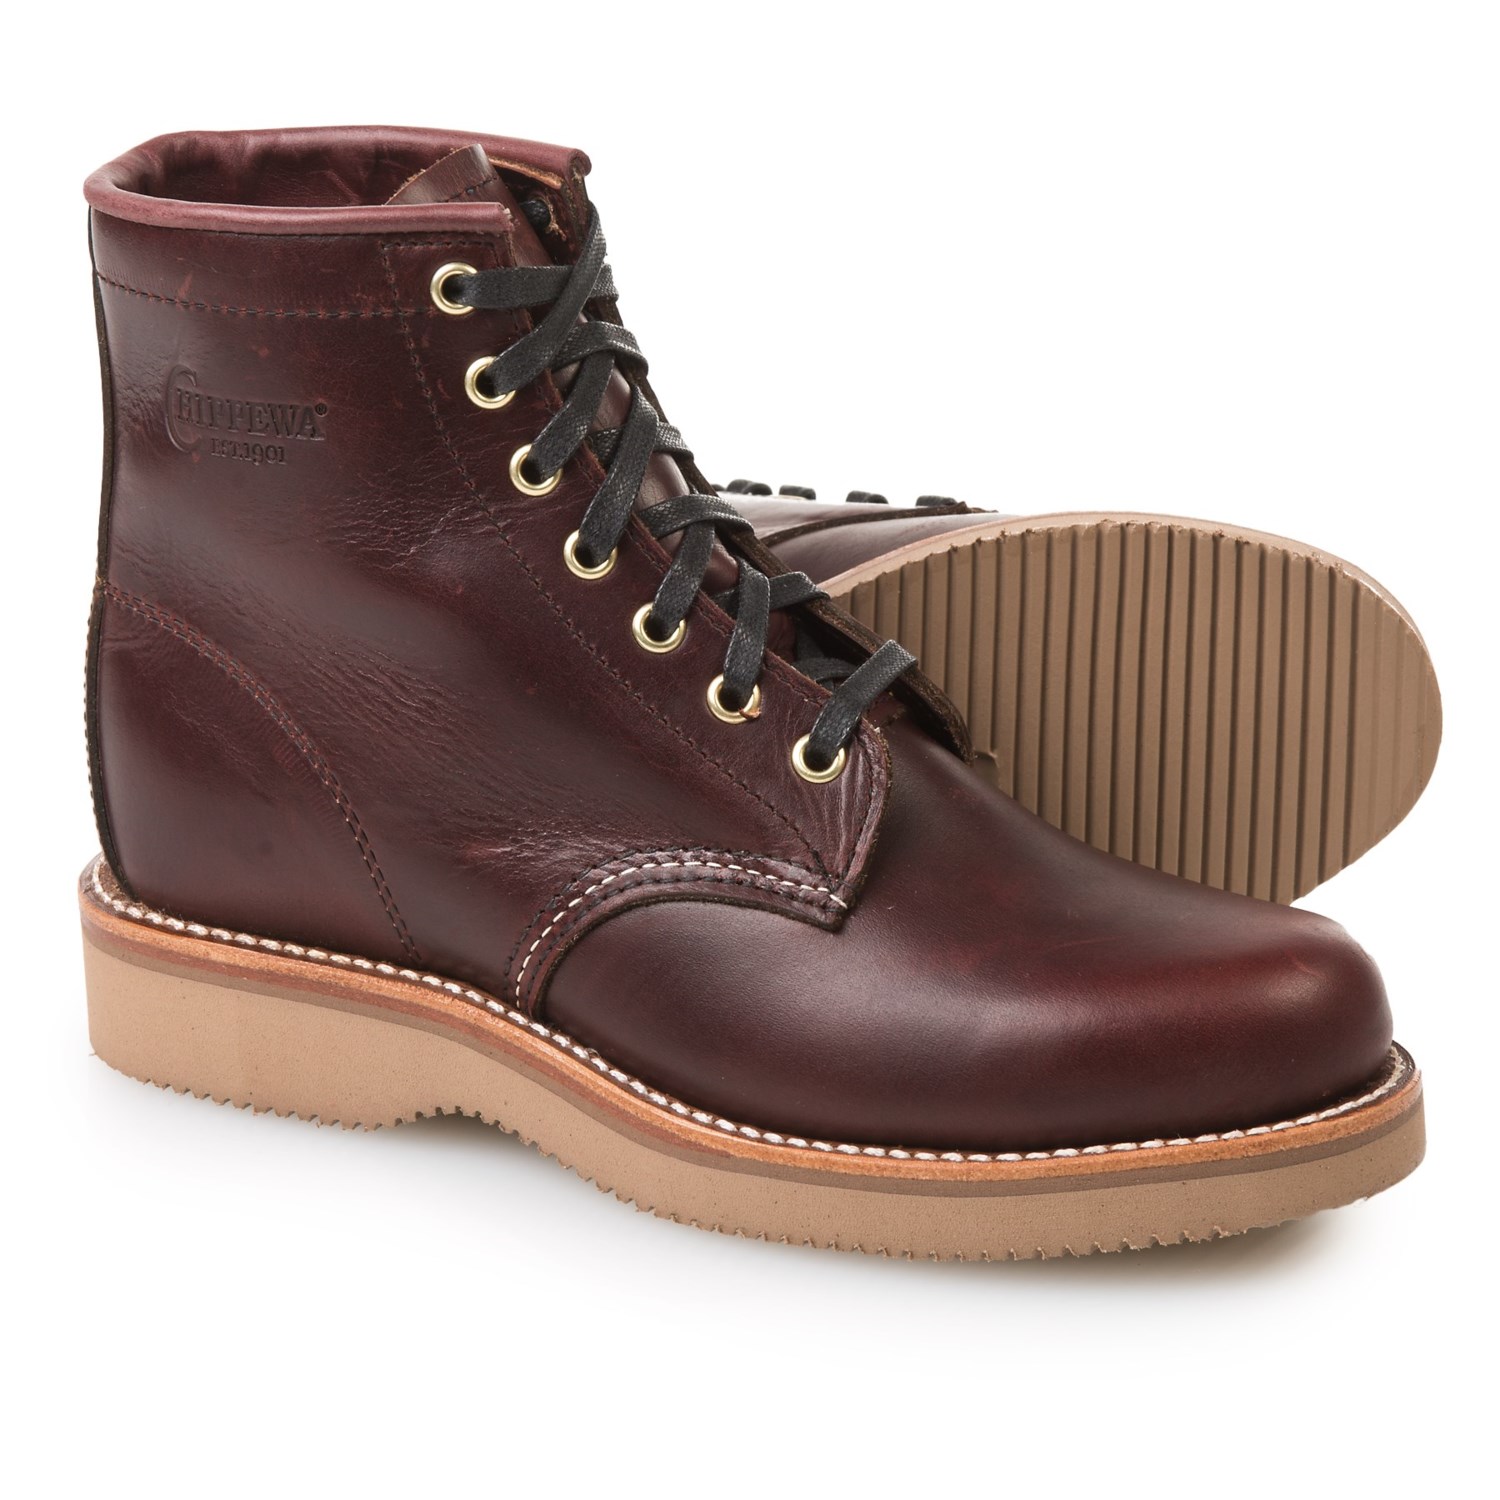 Chippewa Plain-Toe Lace-Up Boots (For Women) - Save 76%